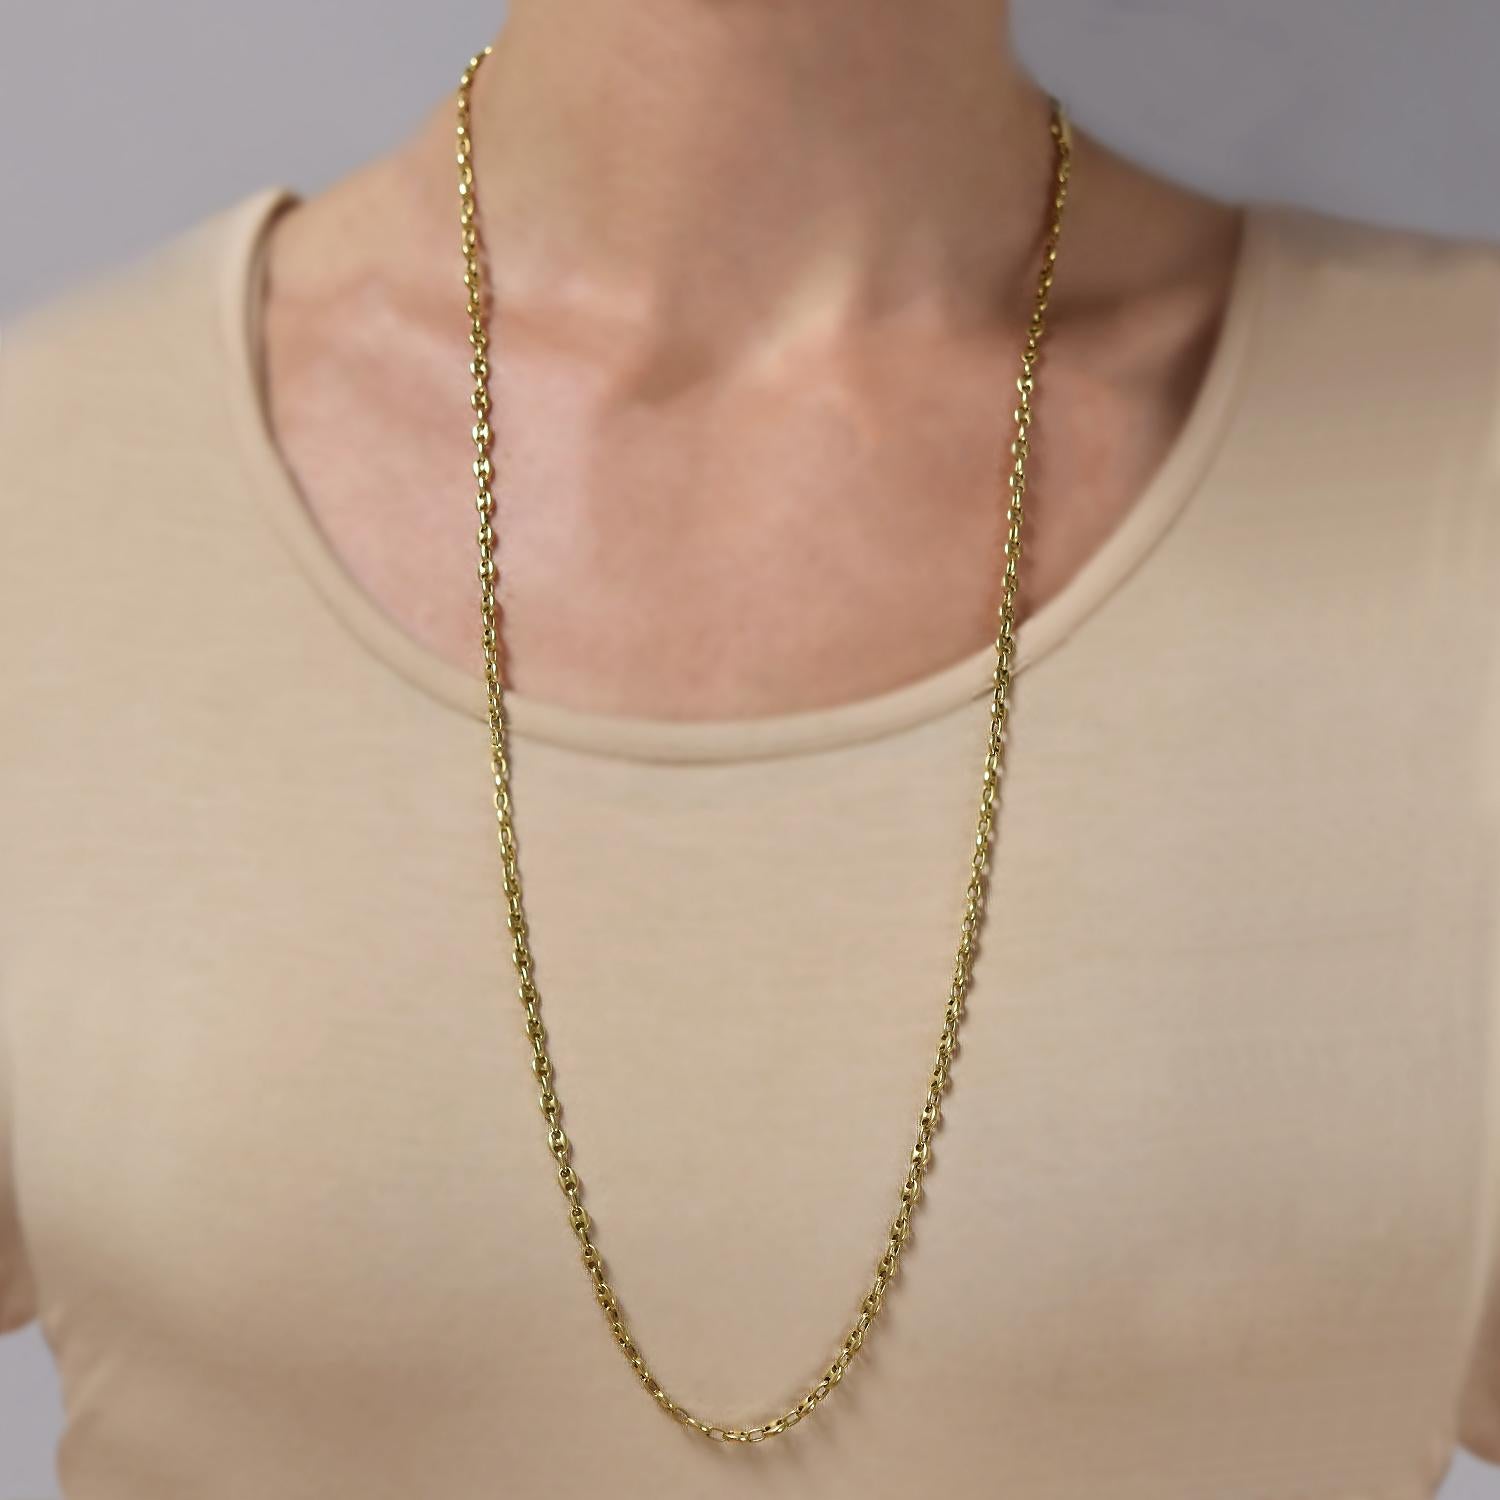 Contemporary Gucci Anchor Link Chain Necklace